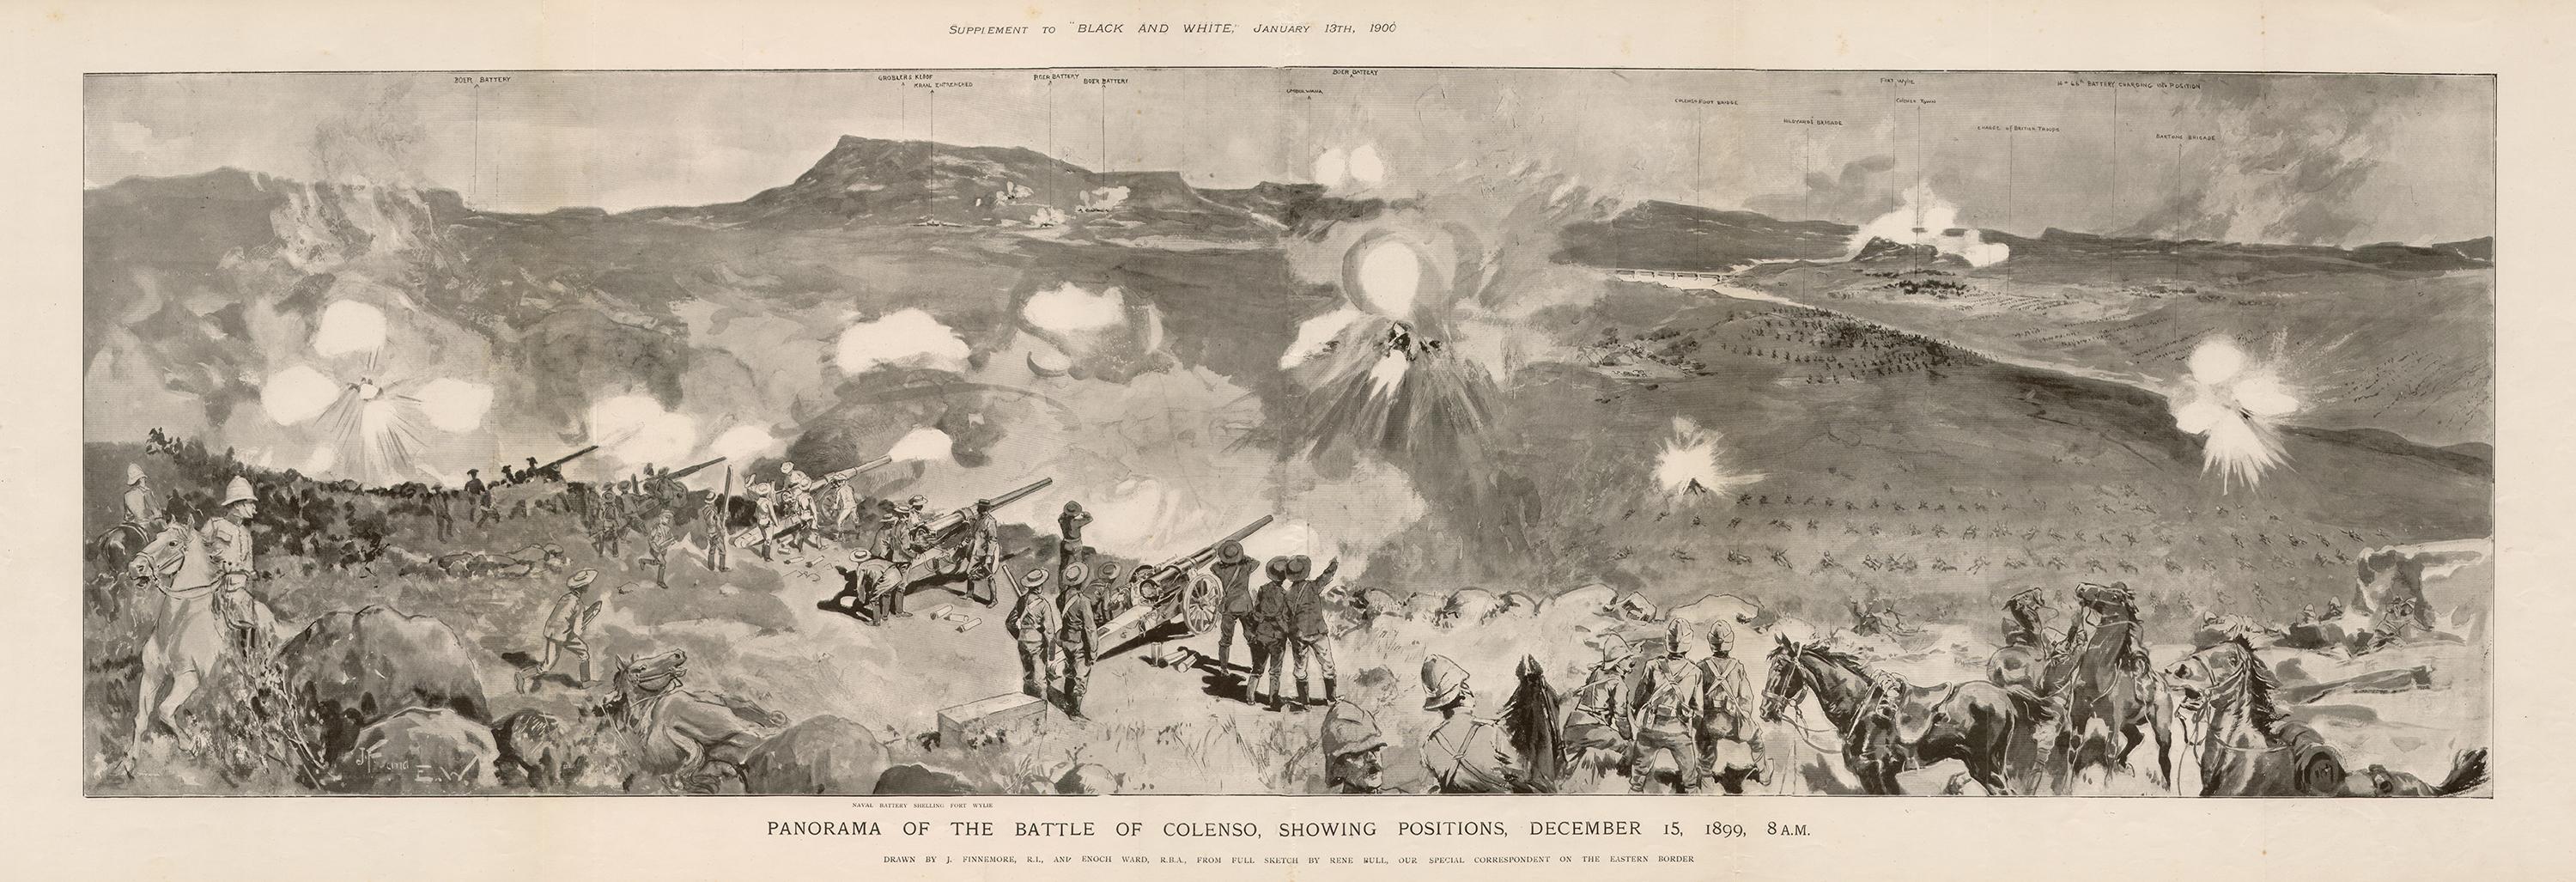 Rene Bull Figurative Print - Boer War - Panorama Of The Battle Of Colenso, military army photogravure